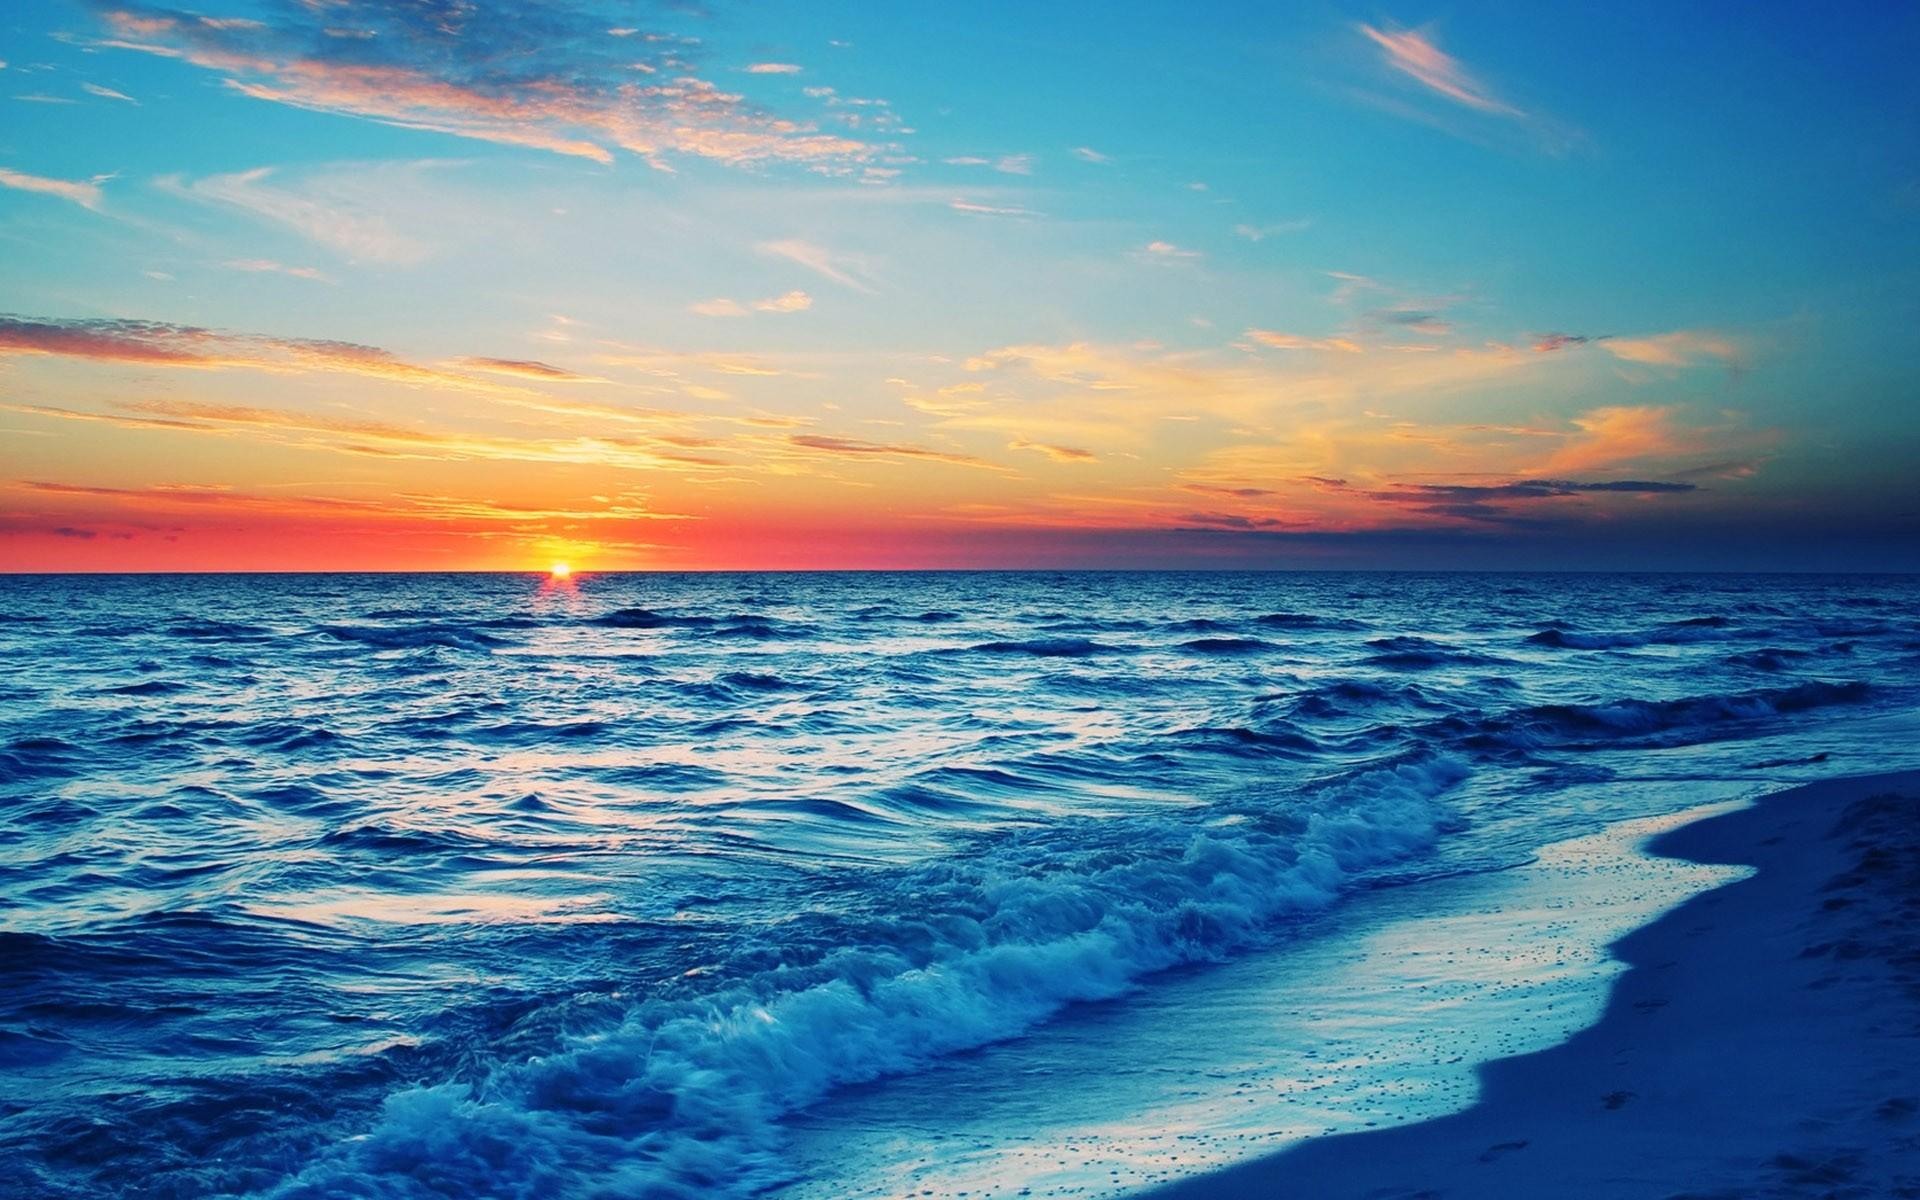 Beach desktop backgroundDownload free awesome High